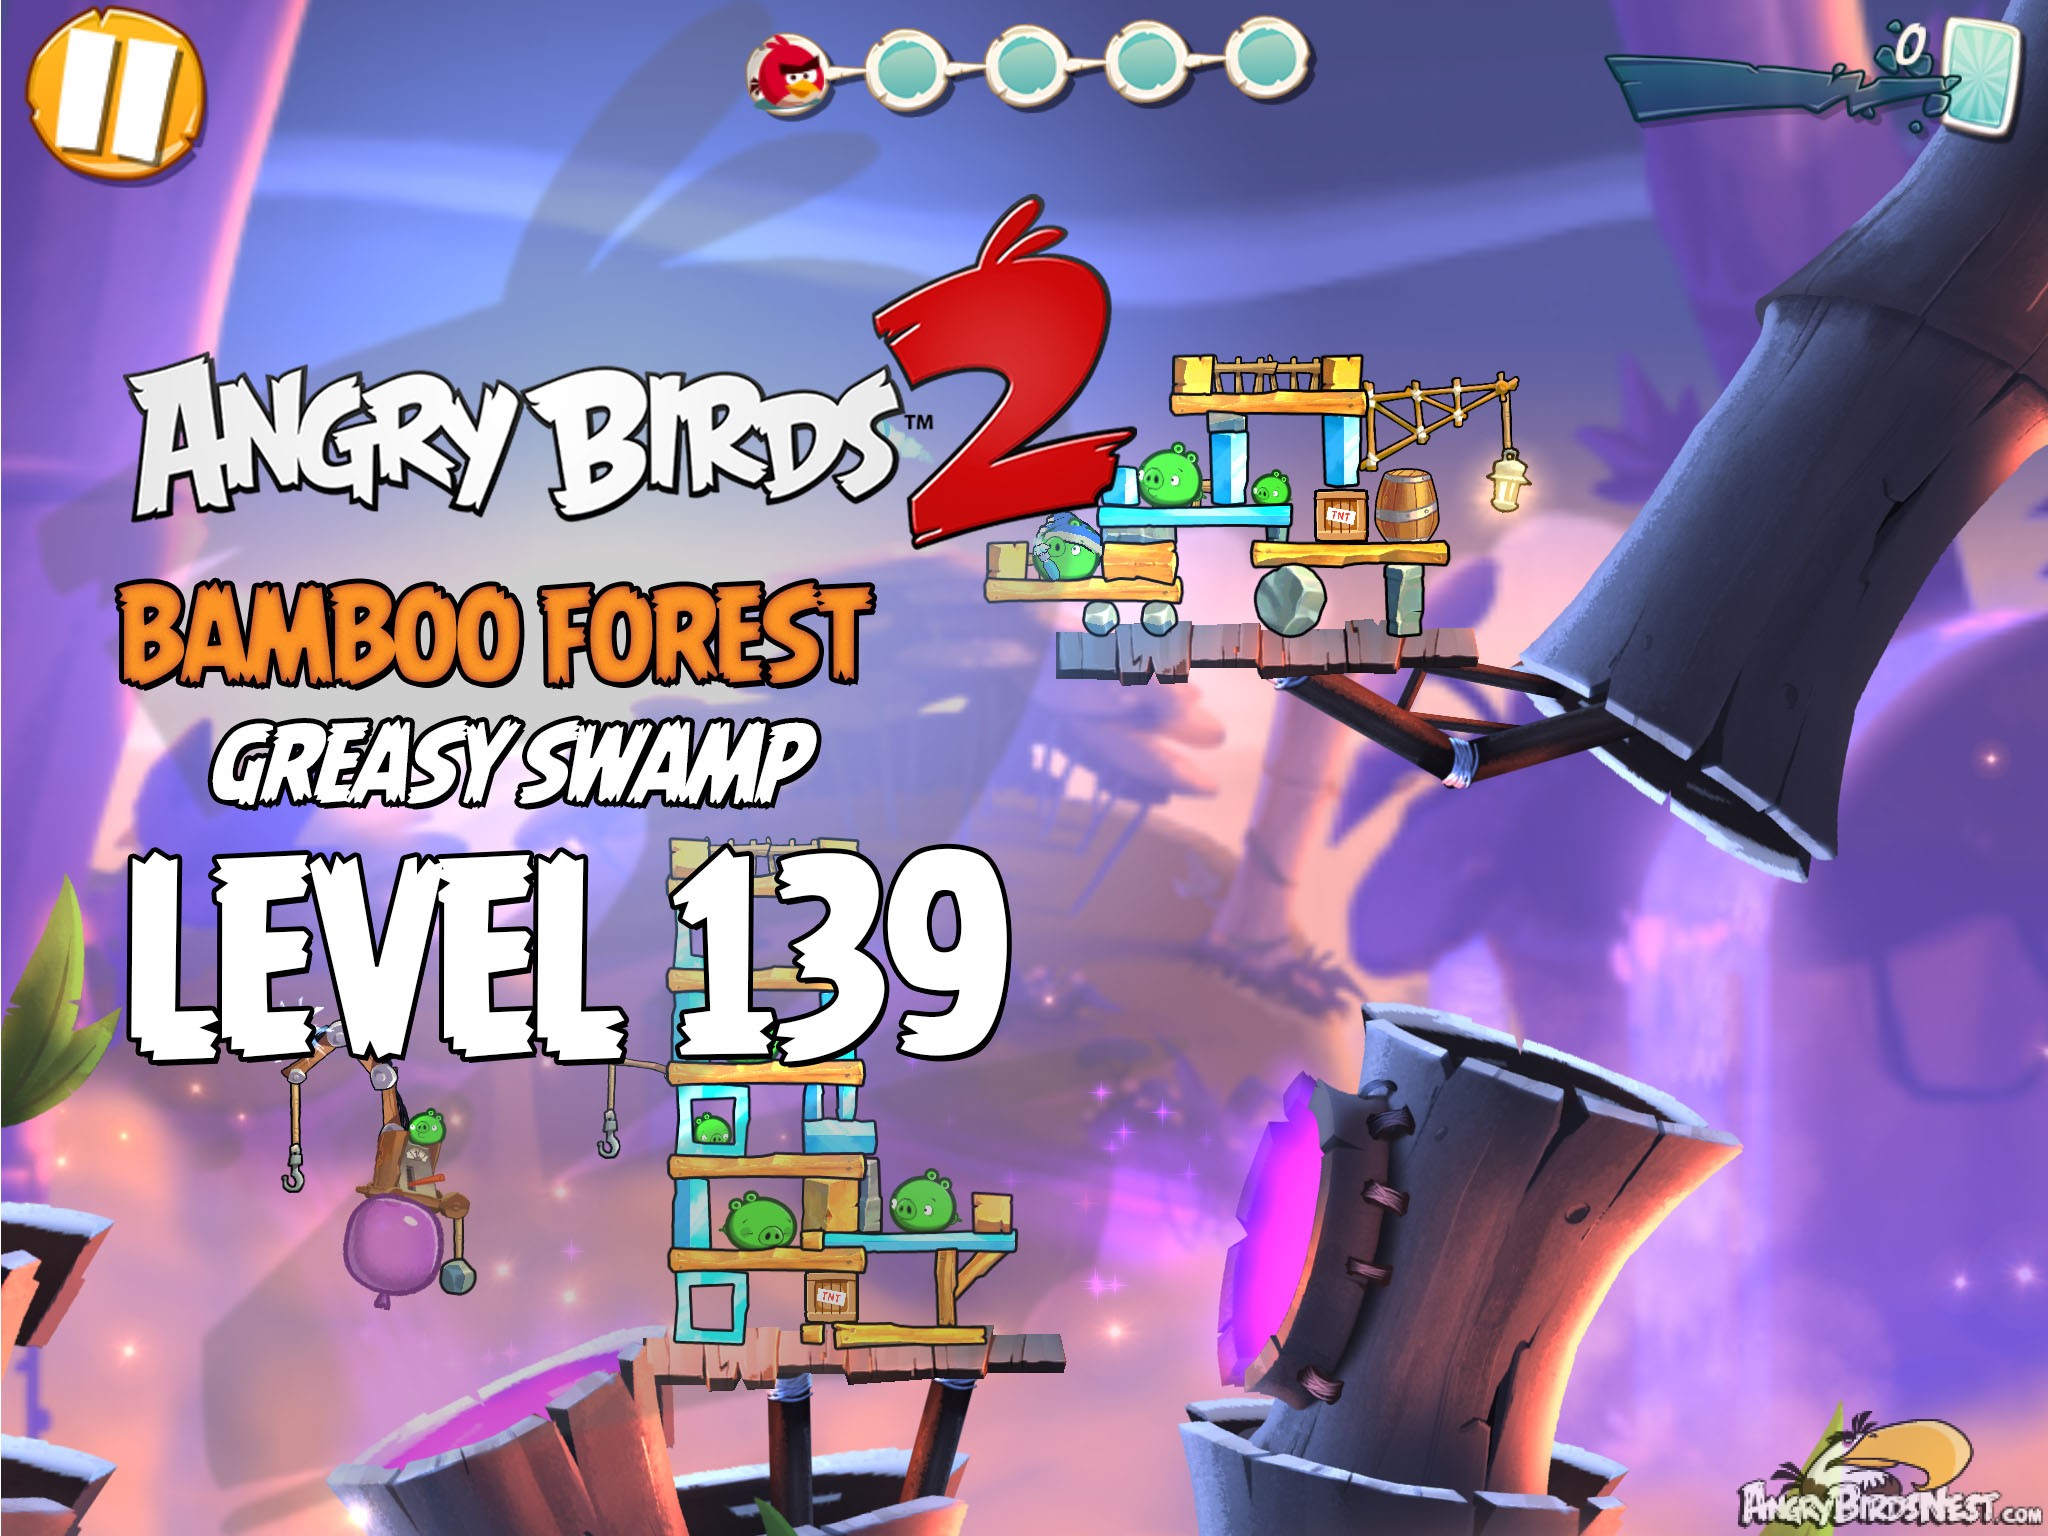 Angry Birds 2 Bamboo Forest Greasy Swamp Level 139